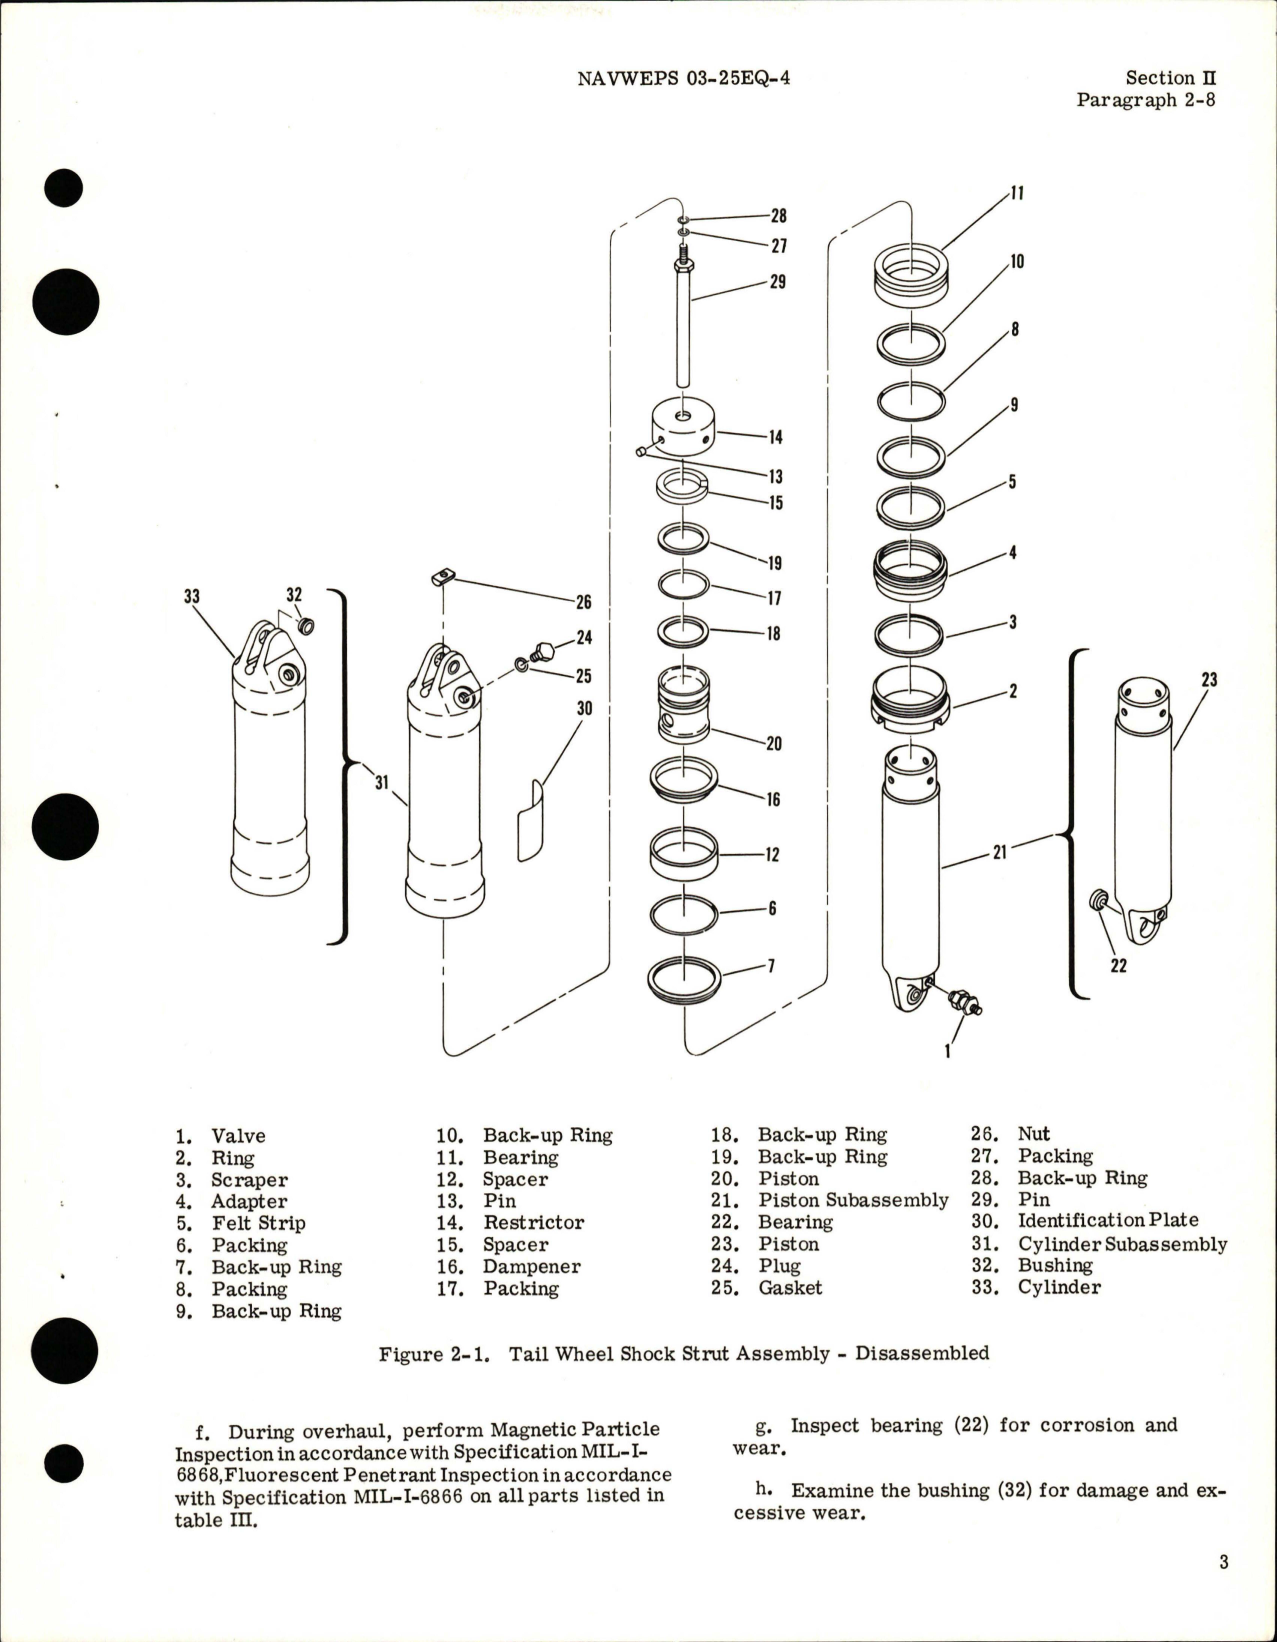 Sample page 5 from AirCorps Library document: Overhaul Instructions for Tail Wheel Shock Strut Assembly - Part S6125-50520-1